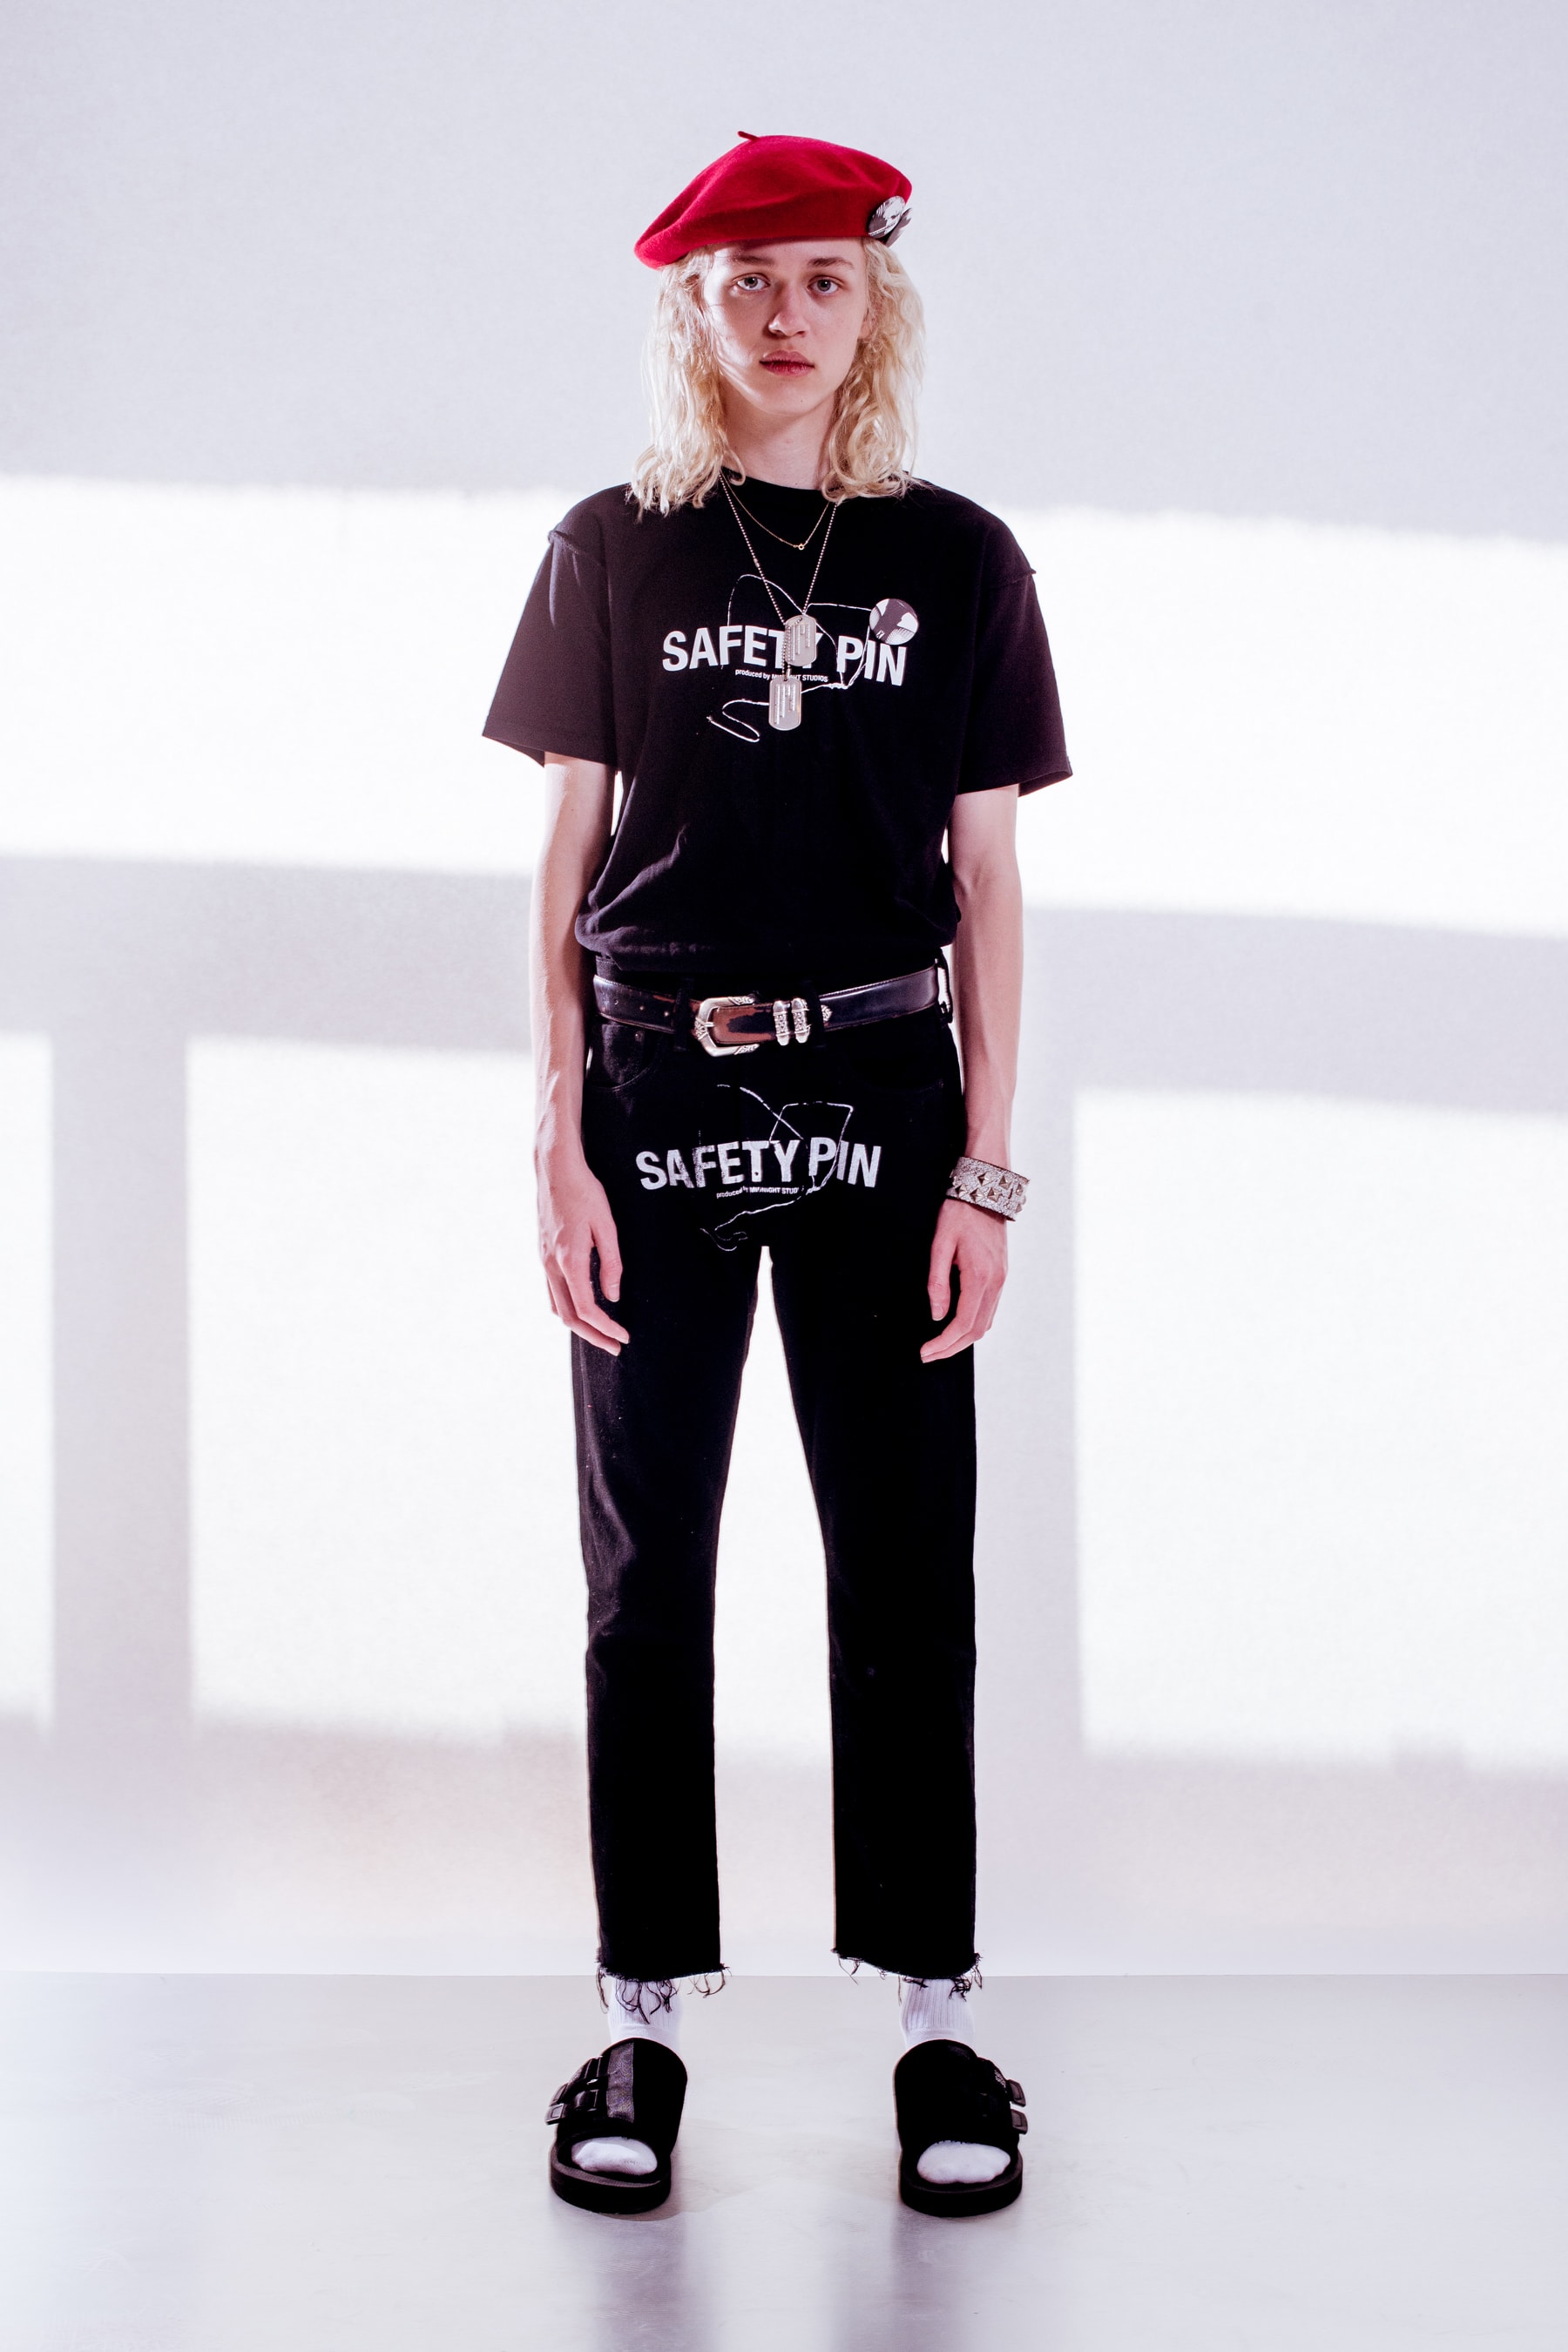 MIDNIGHT STUDIOS 2017 Spring/Summer "Safety Pin" Collection Lookbook SHANE GONZALES